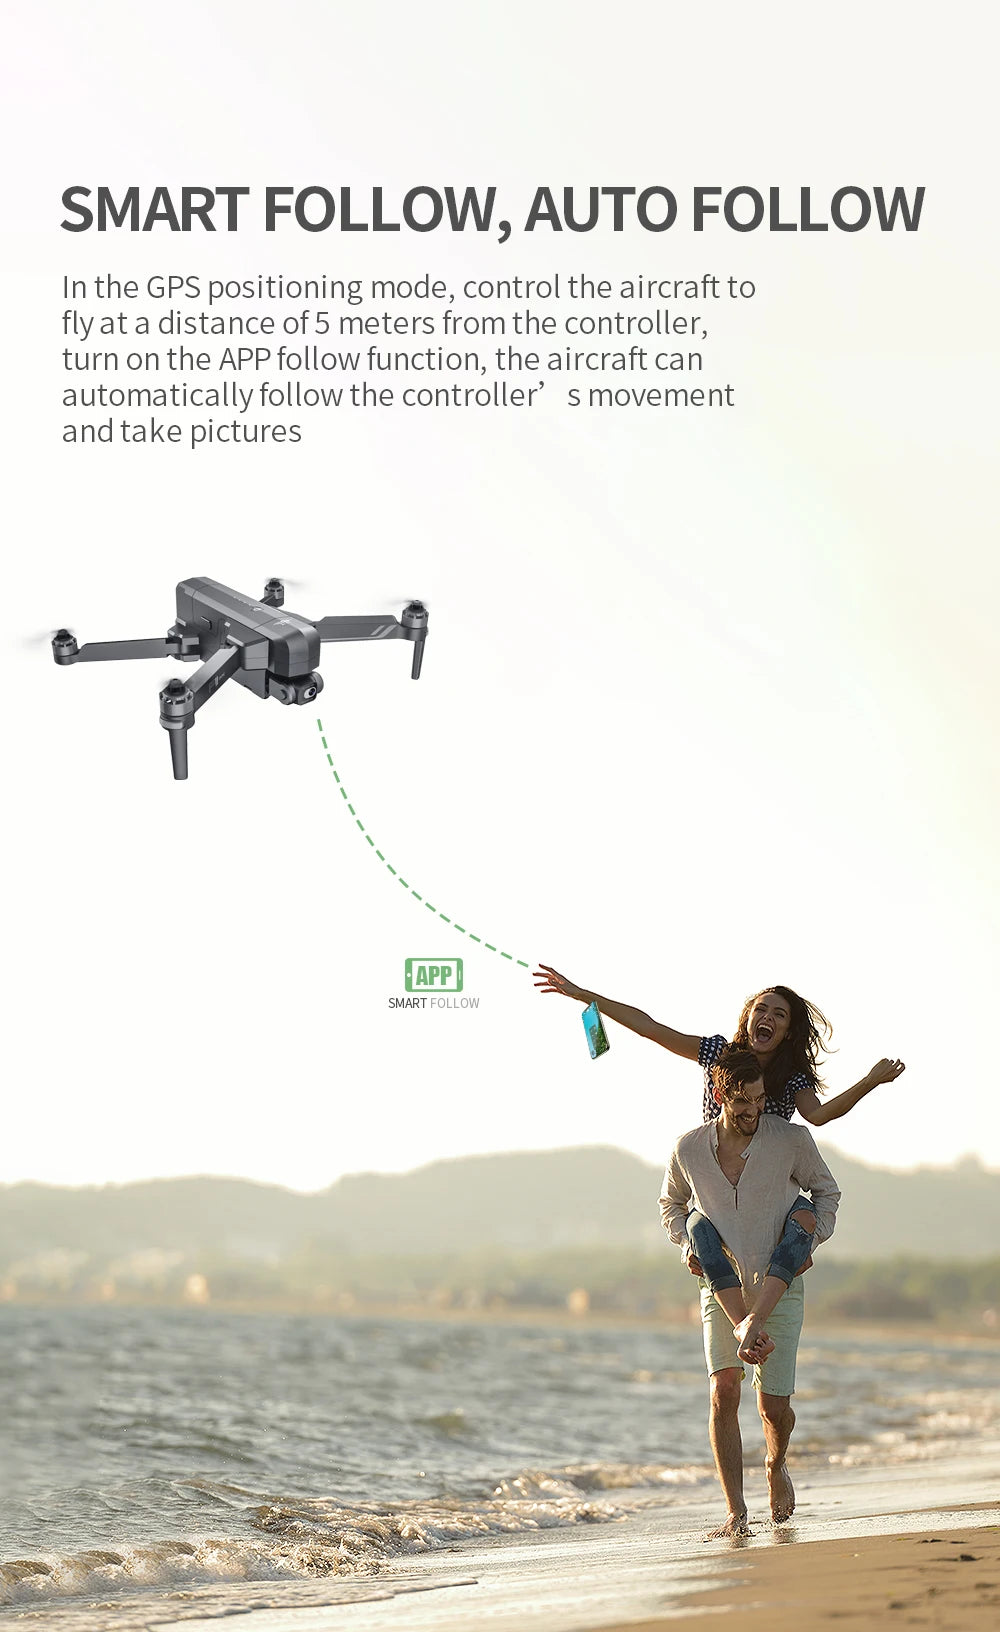 SJRC F11 / F11S  Pro Drone, turn on the APP follow function; the aircraft can follow the controller' s movement 